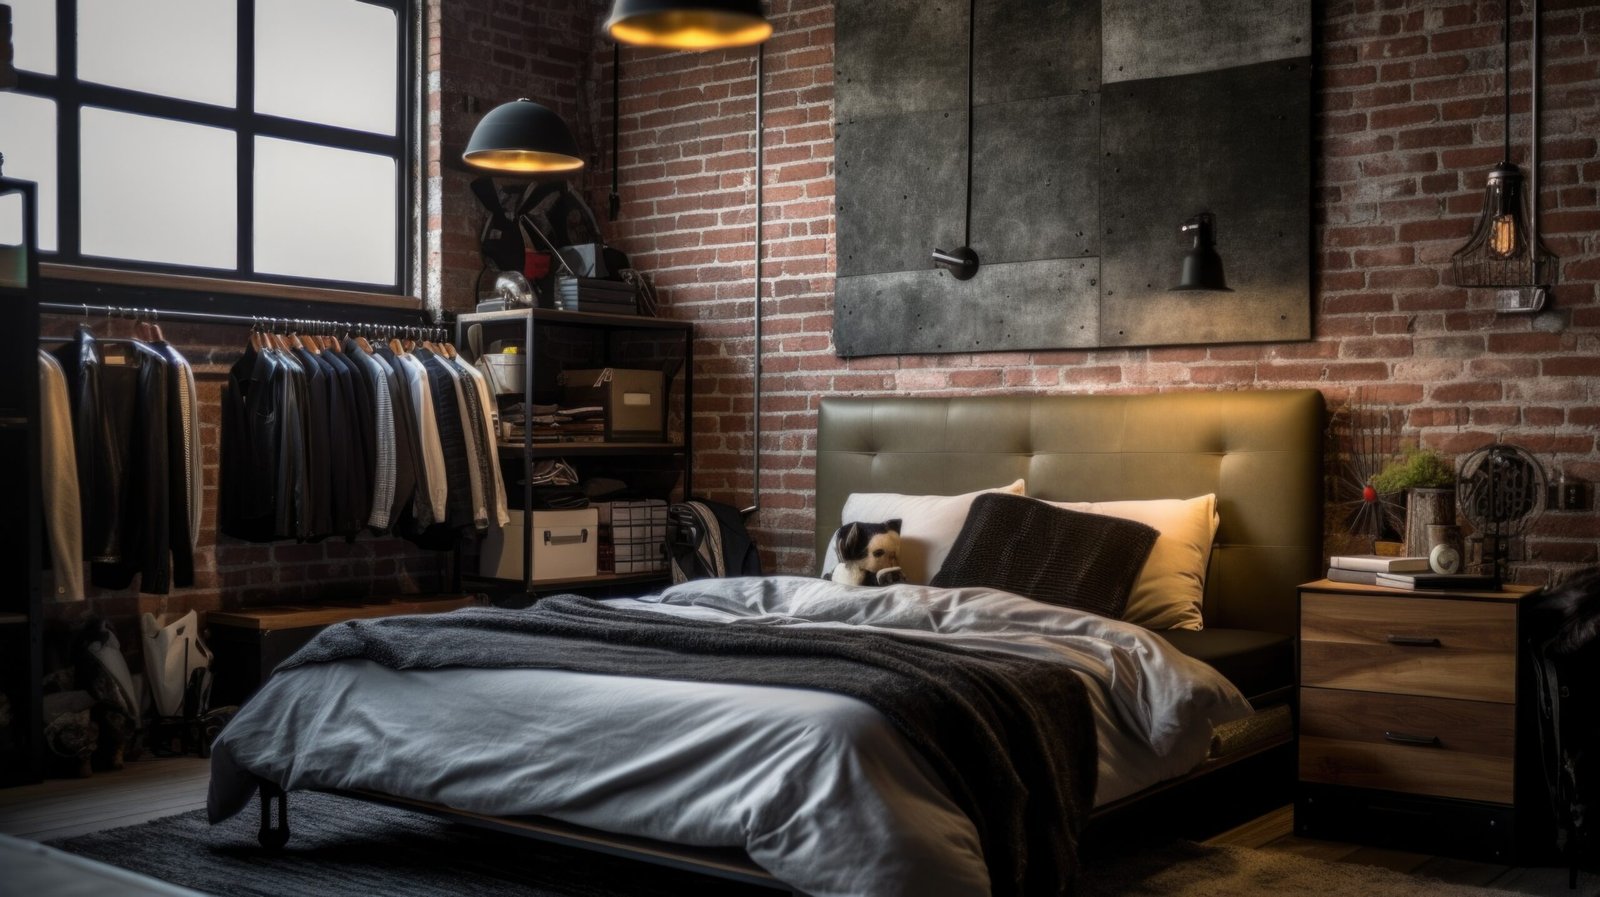 Industrial rustic style with exposed brick wall decorated with metal and wood material.